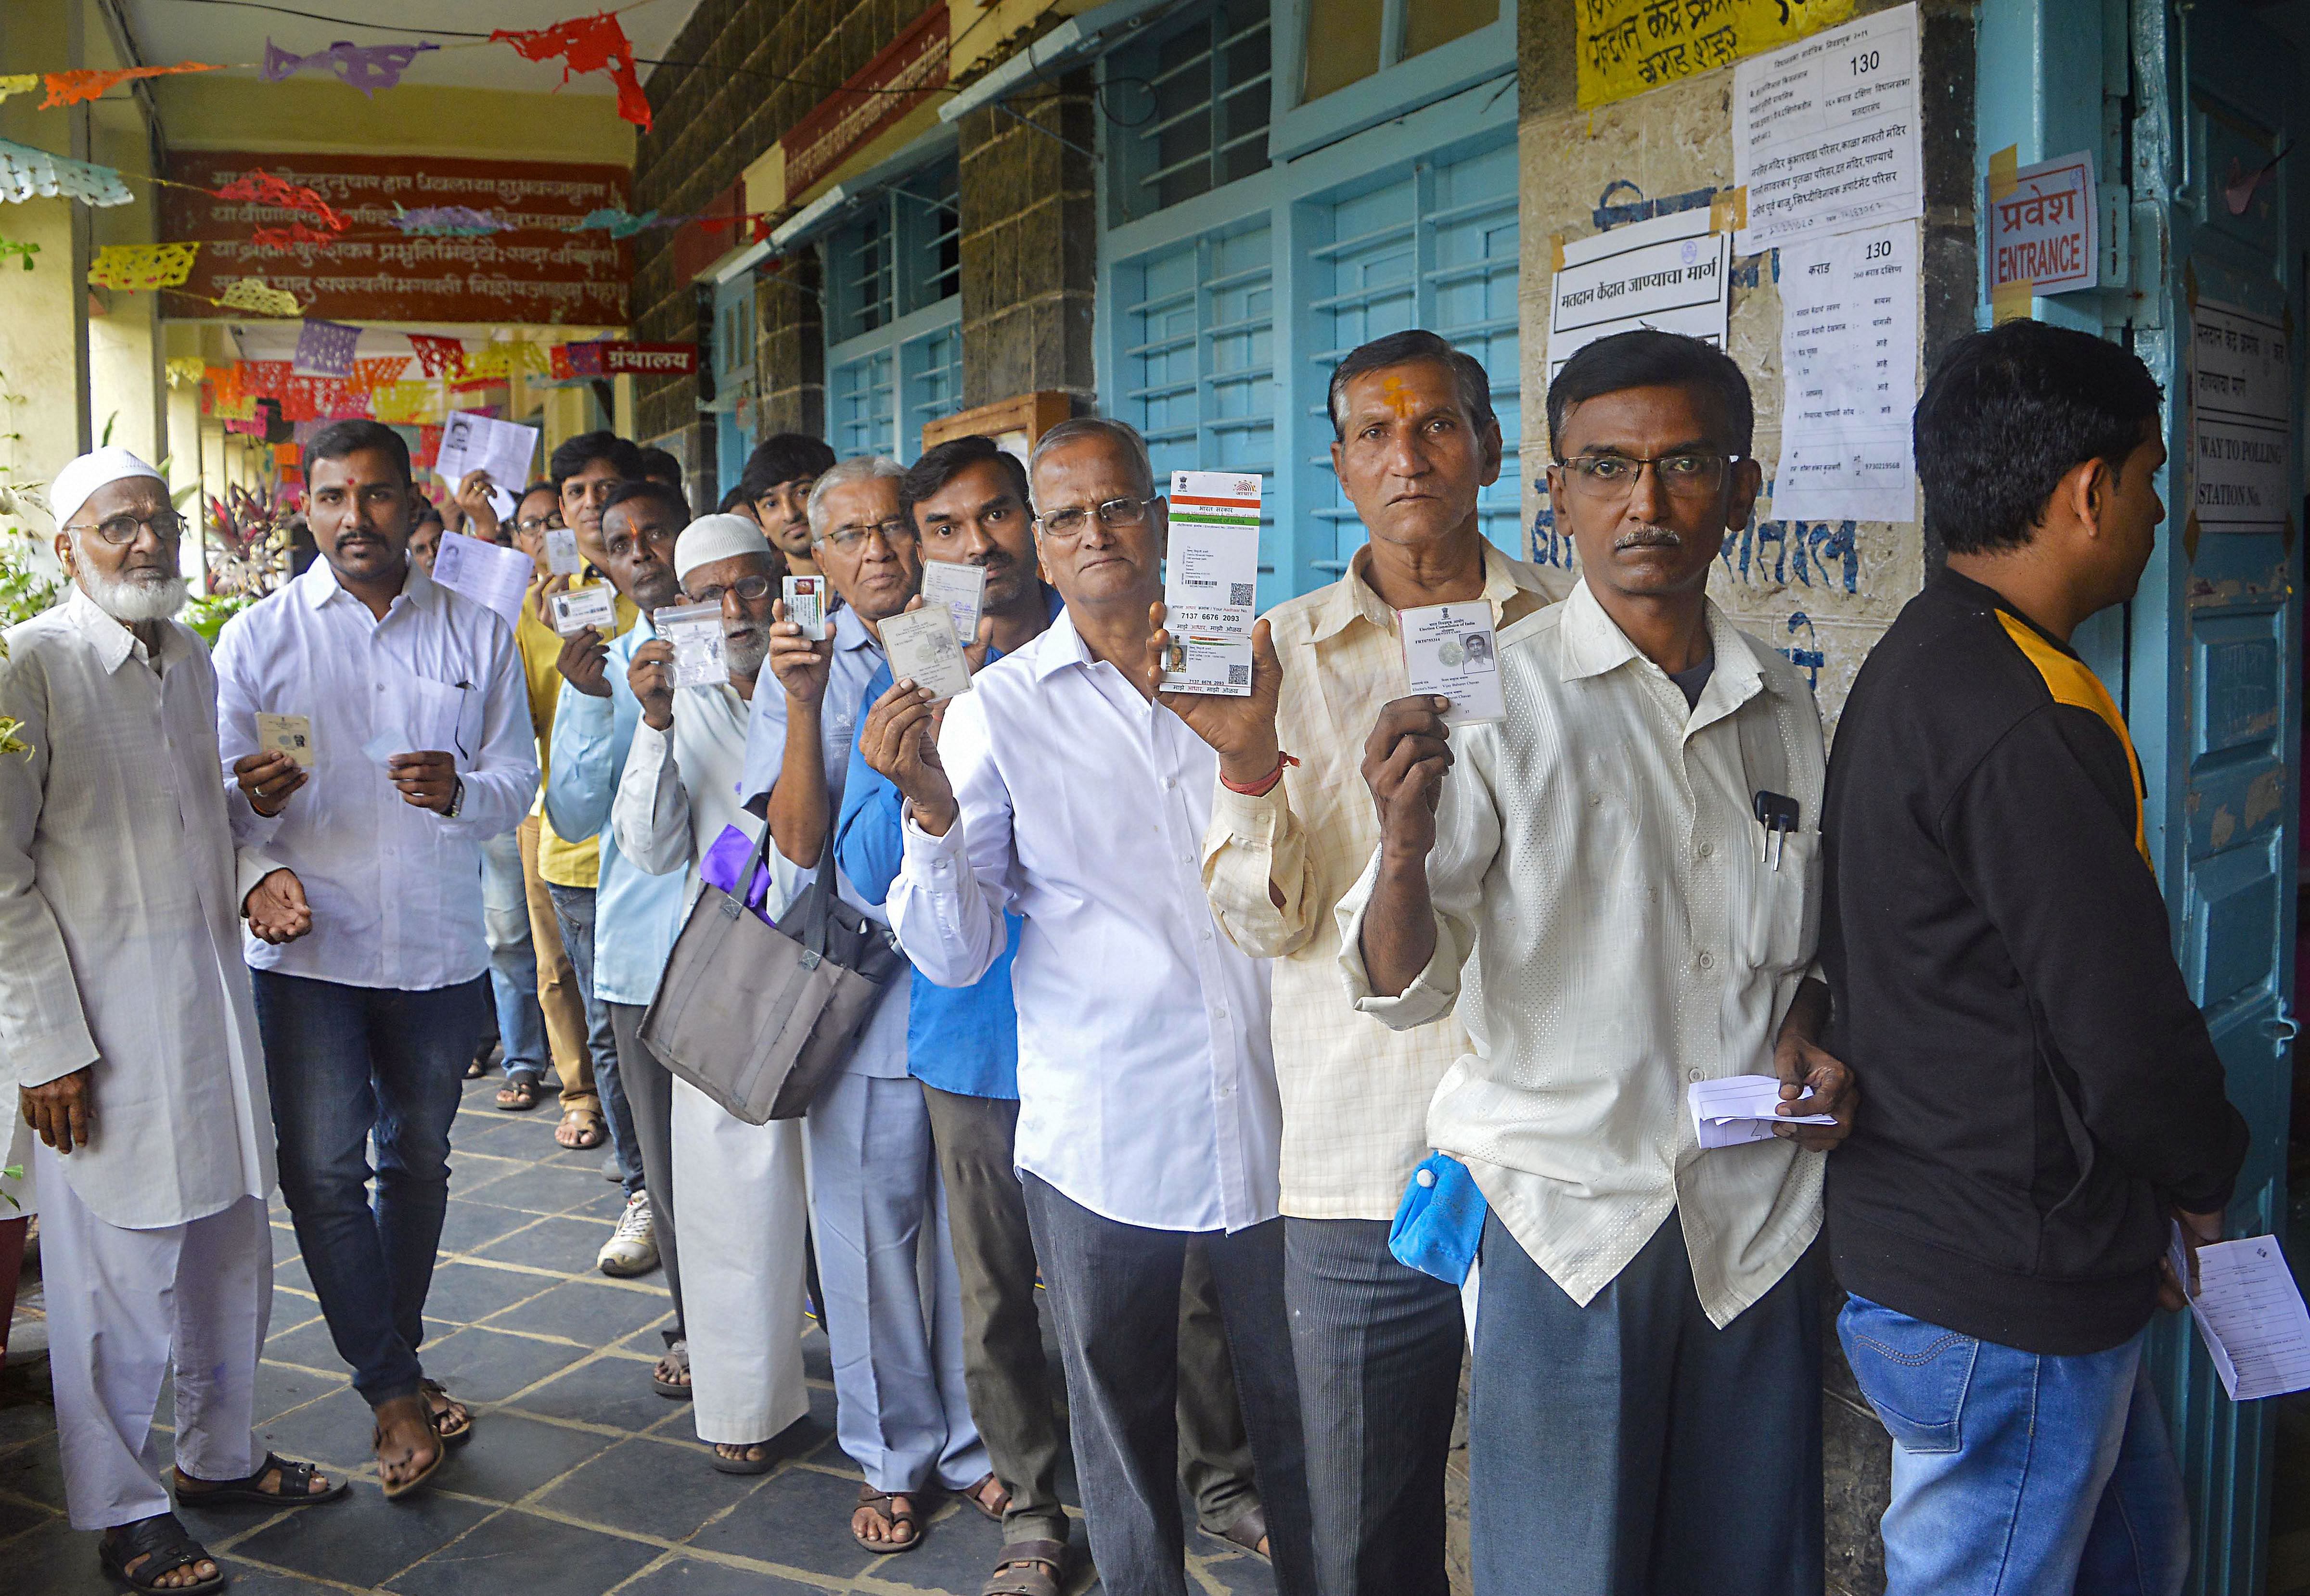 Voters stand in a queue and show their voting cards as they wait to cast their votes at a polling station for the Maharashtra Assembly elections. (PTI Photo)